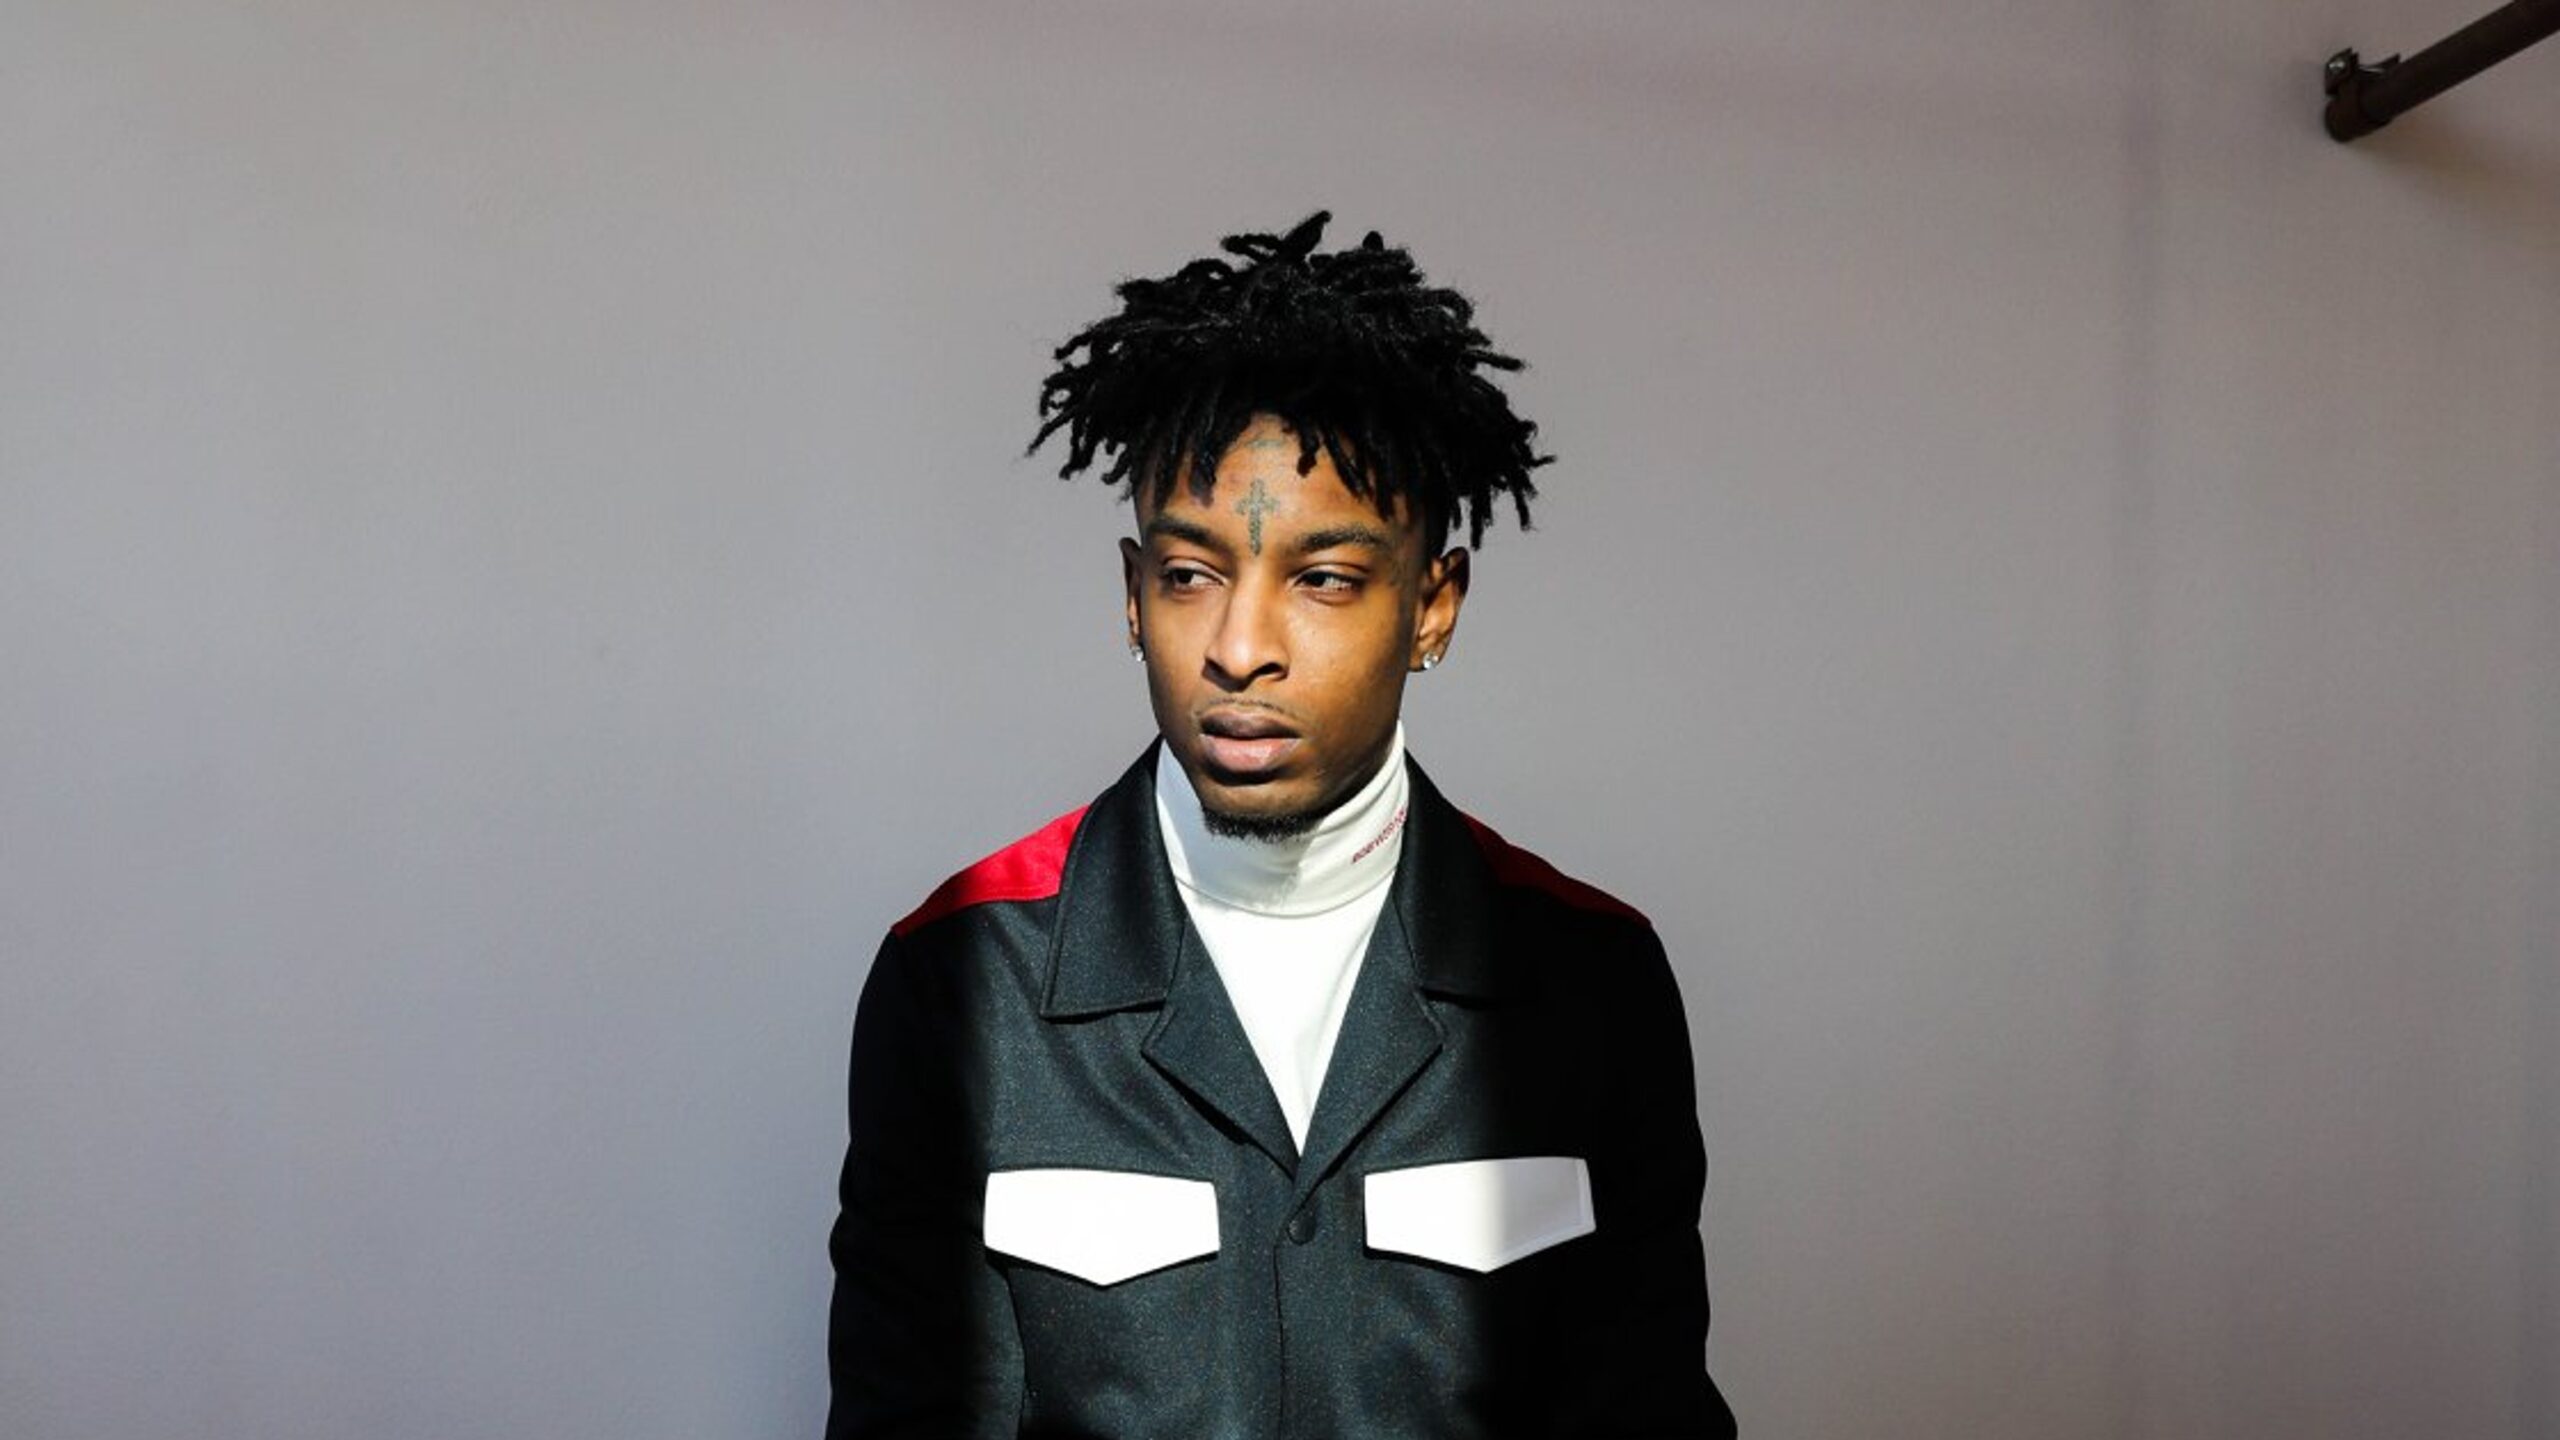 Instagram Flexin: 21 Savage Throwing A Costume Party in Atlanta